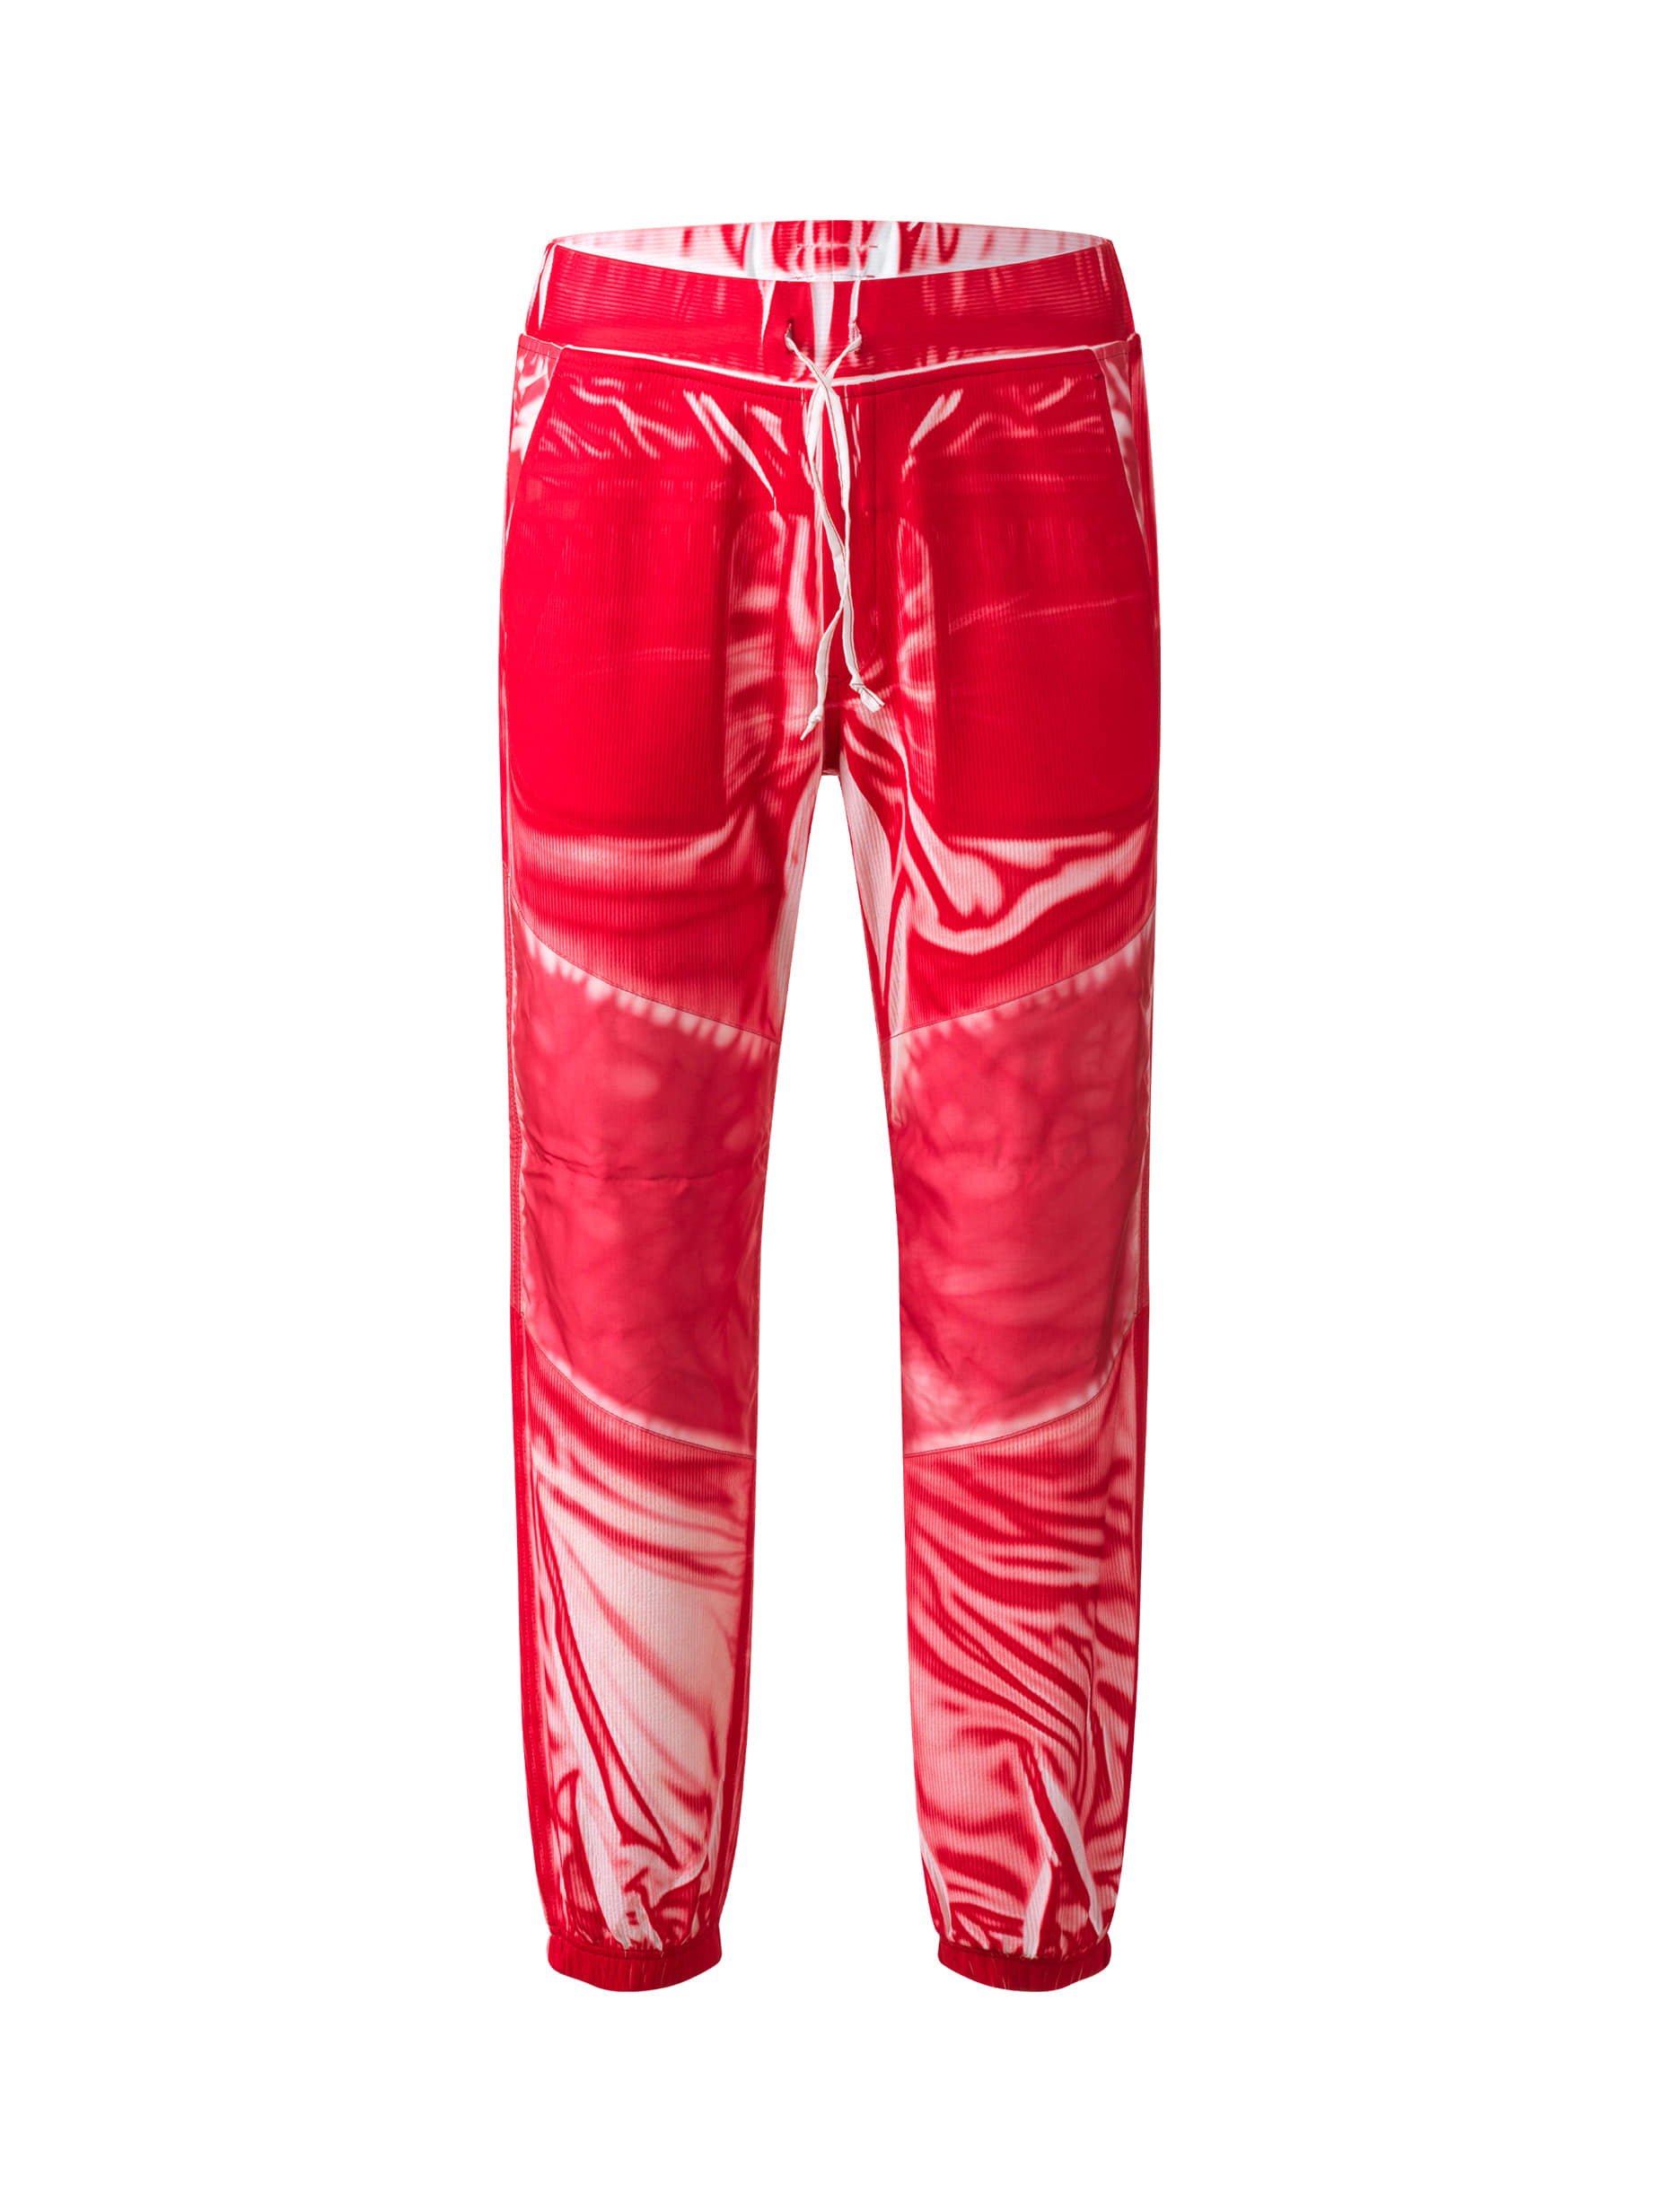 AIRBAG PATCHED JERSEY TRACK PANTS RED PRINT